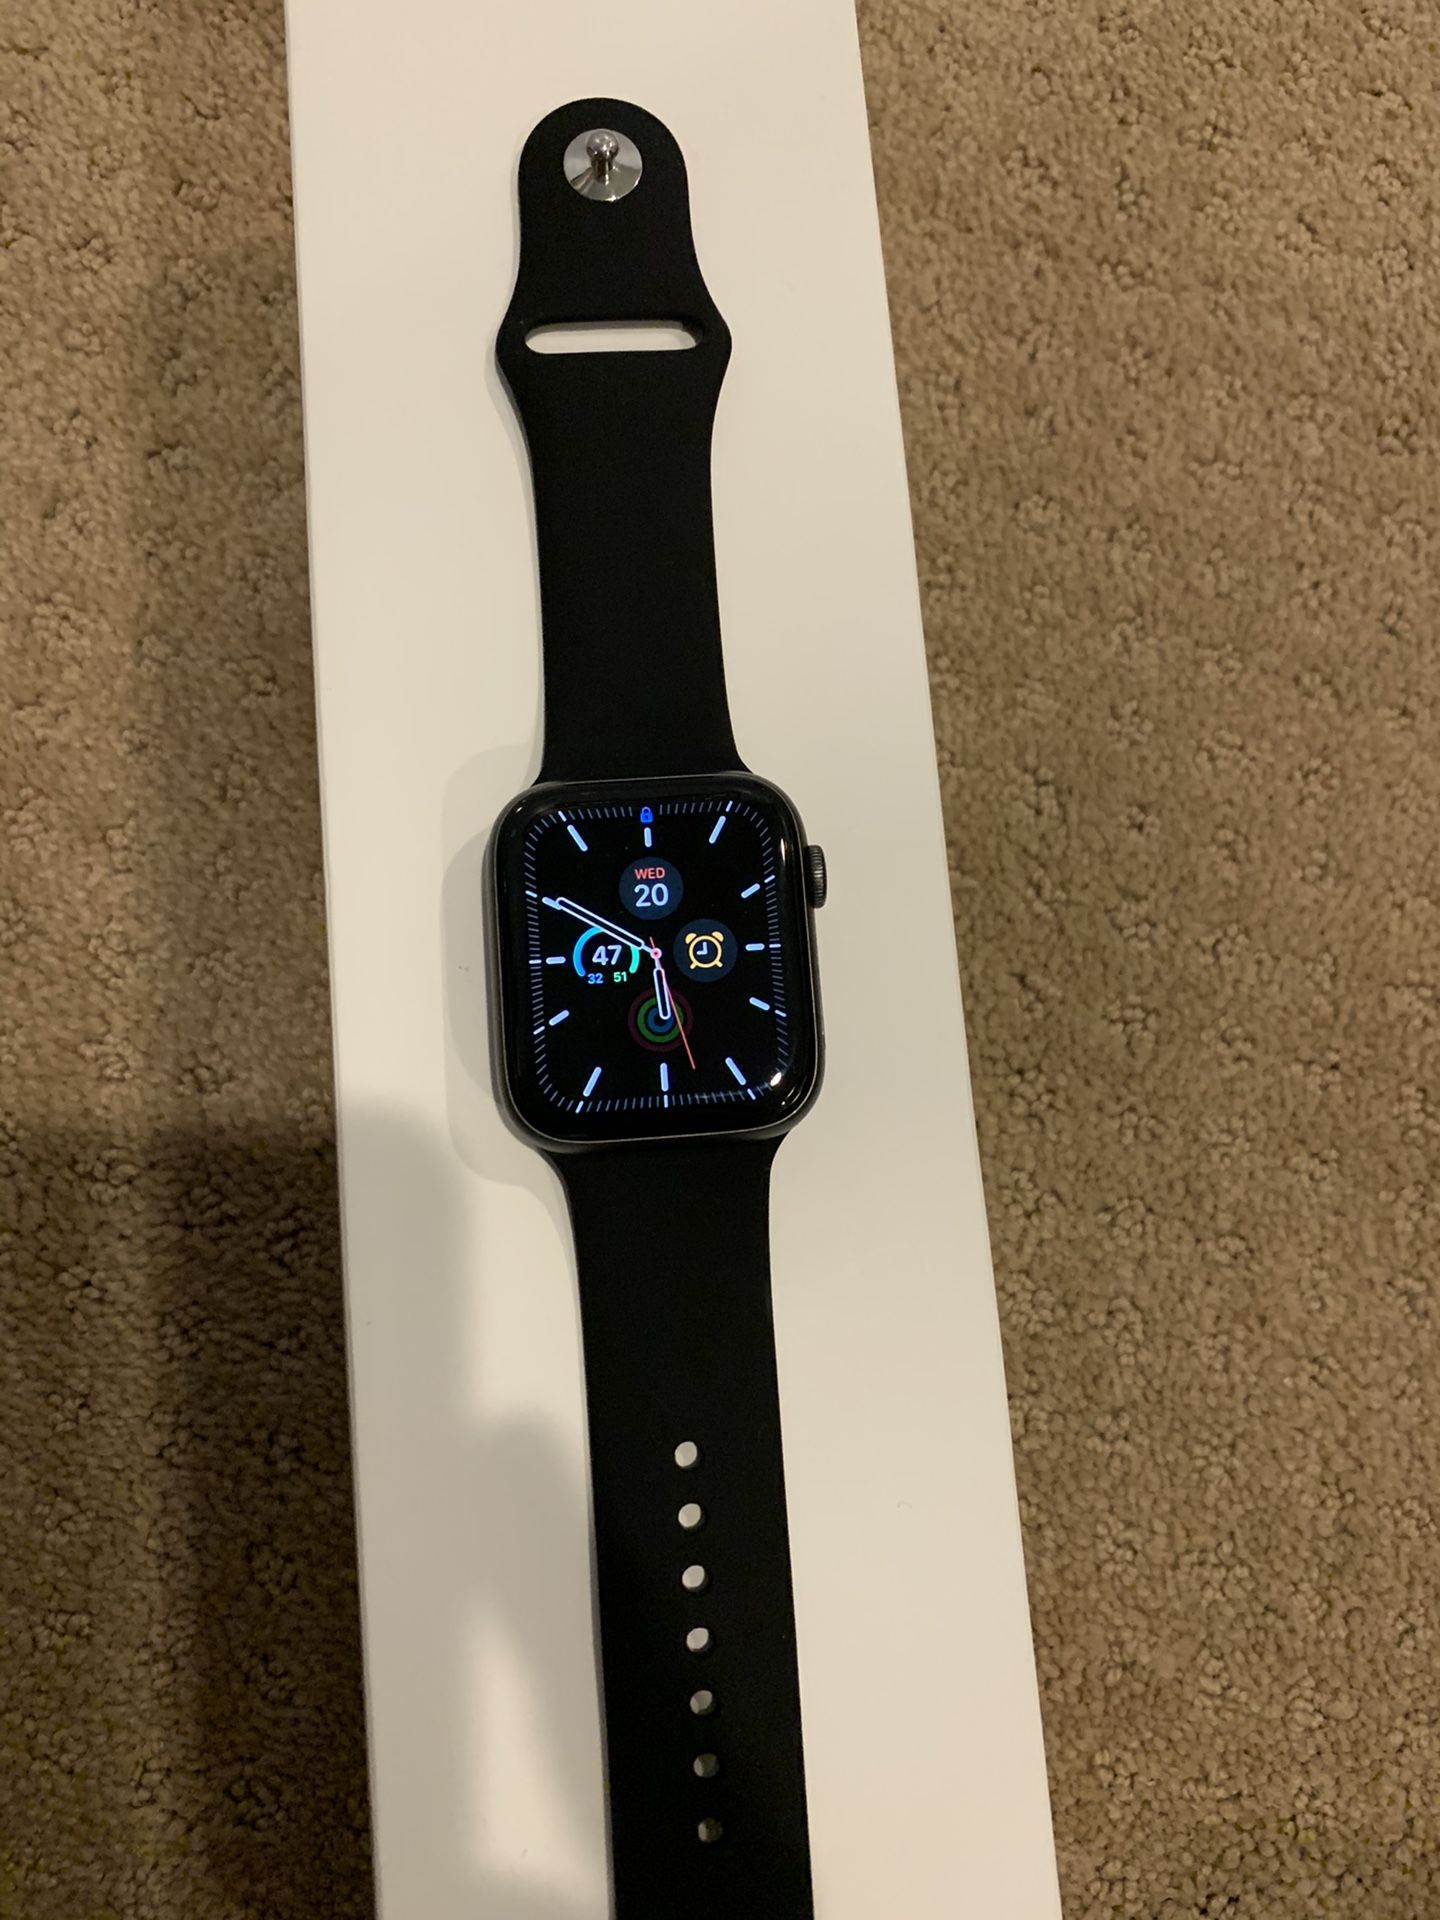 Apple Watch series 4 44mm GPS LTE. Like new. Original box and paper work.